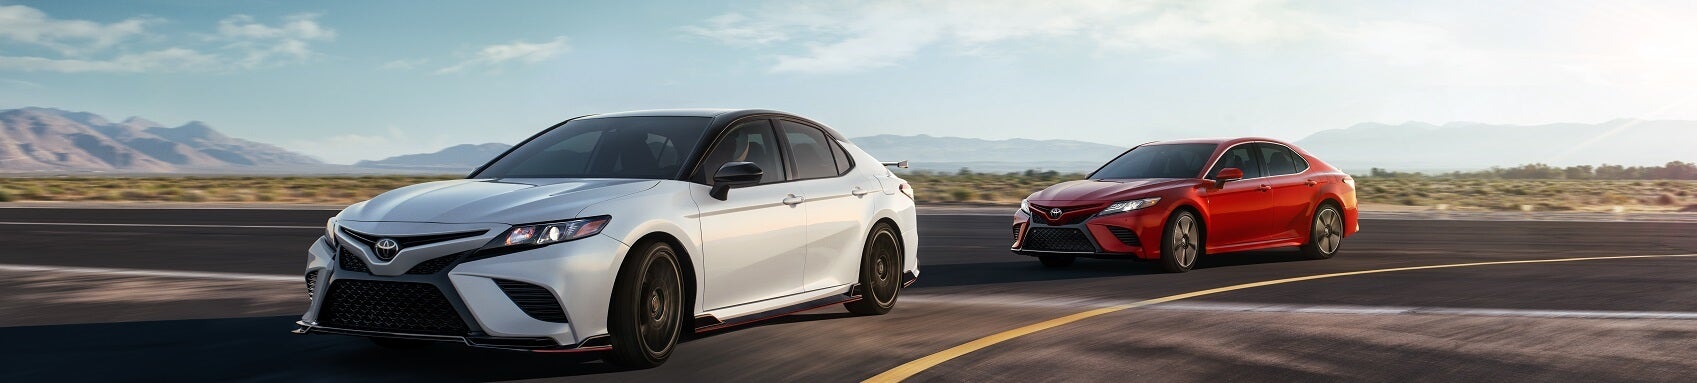 2020 Toyota Camry models